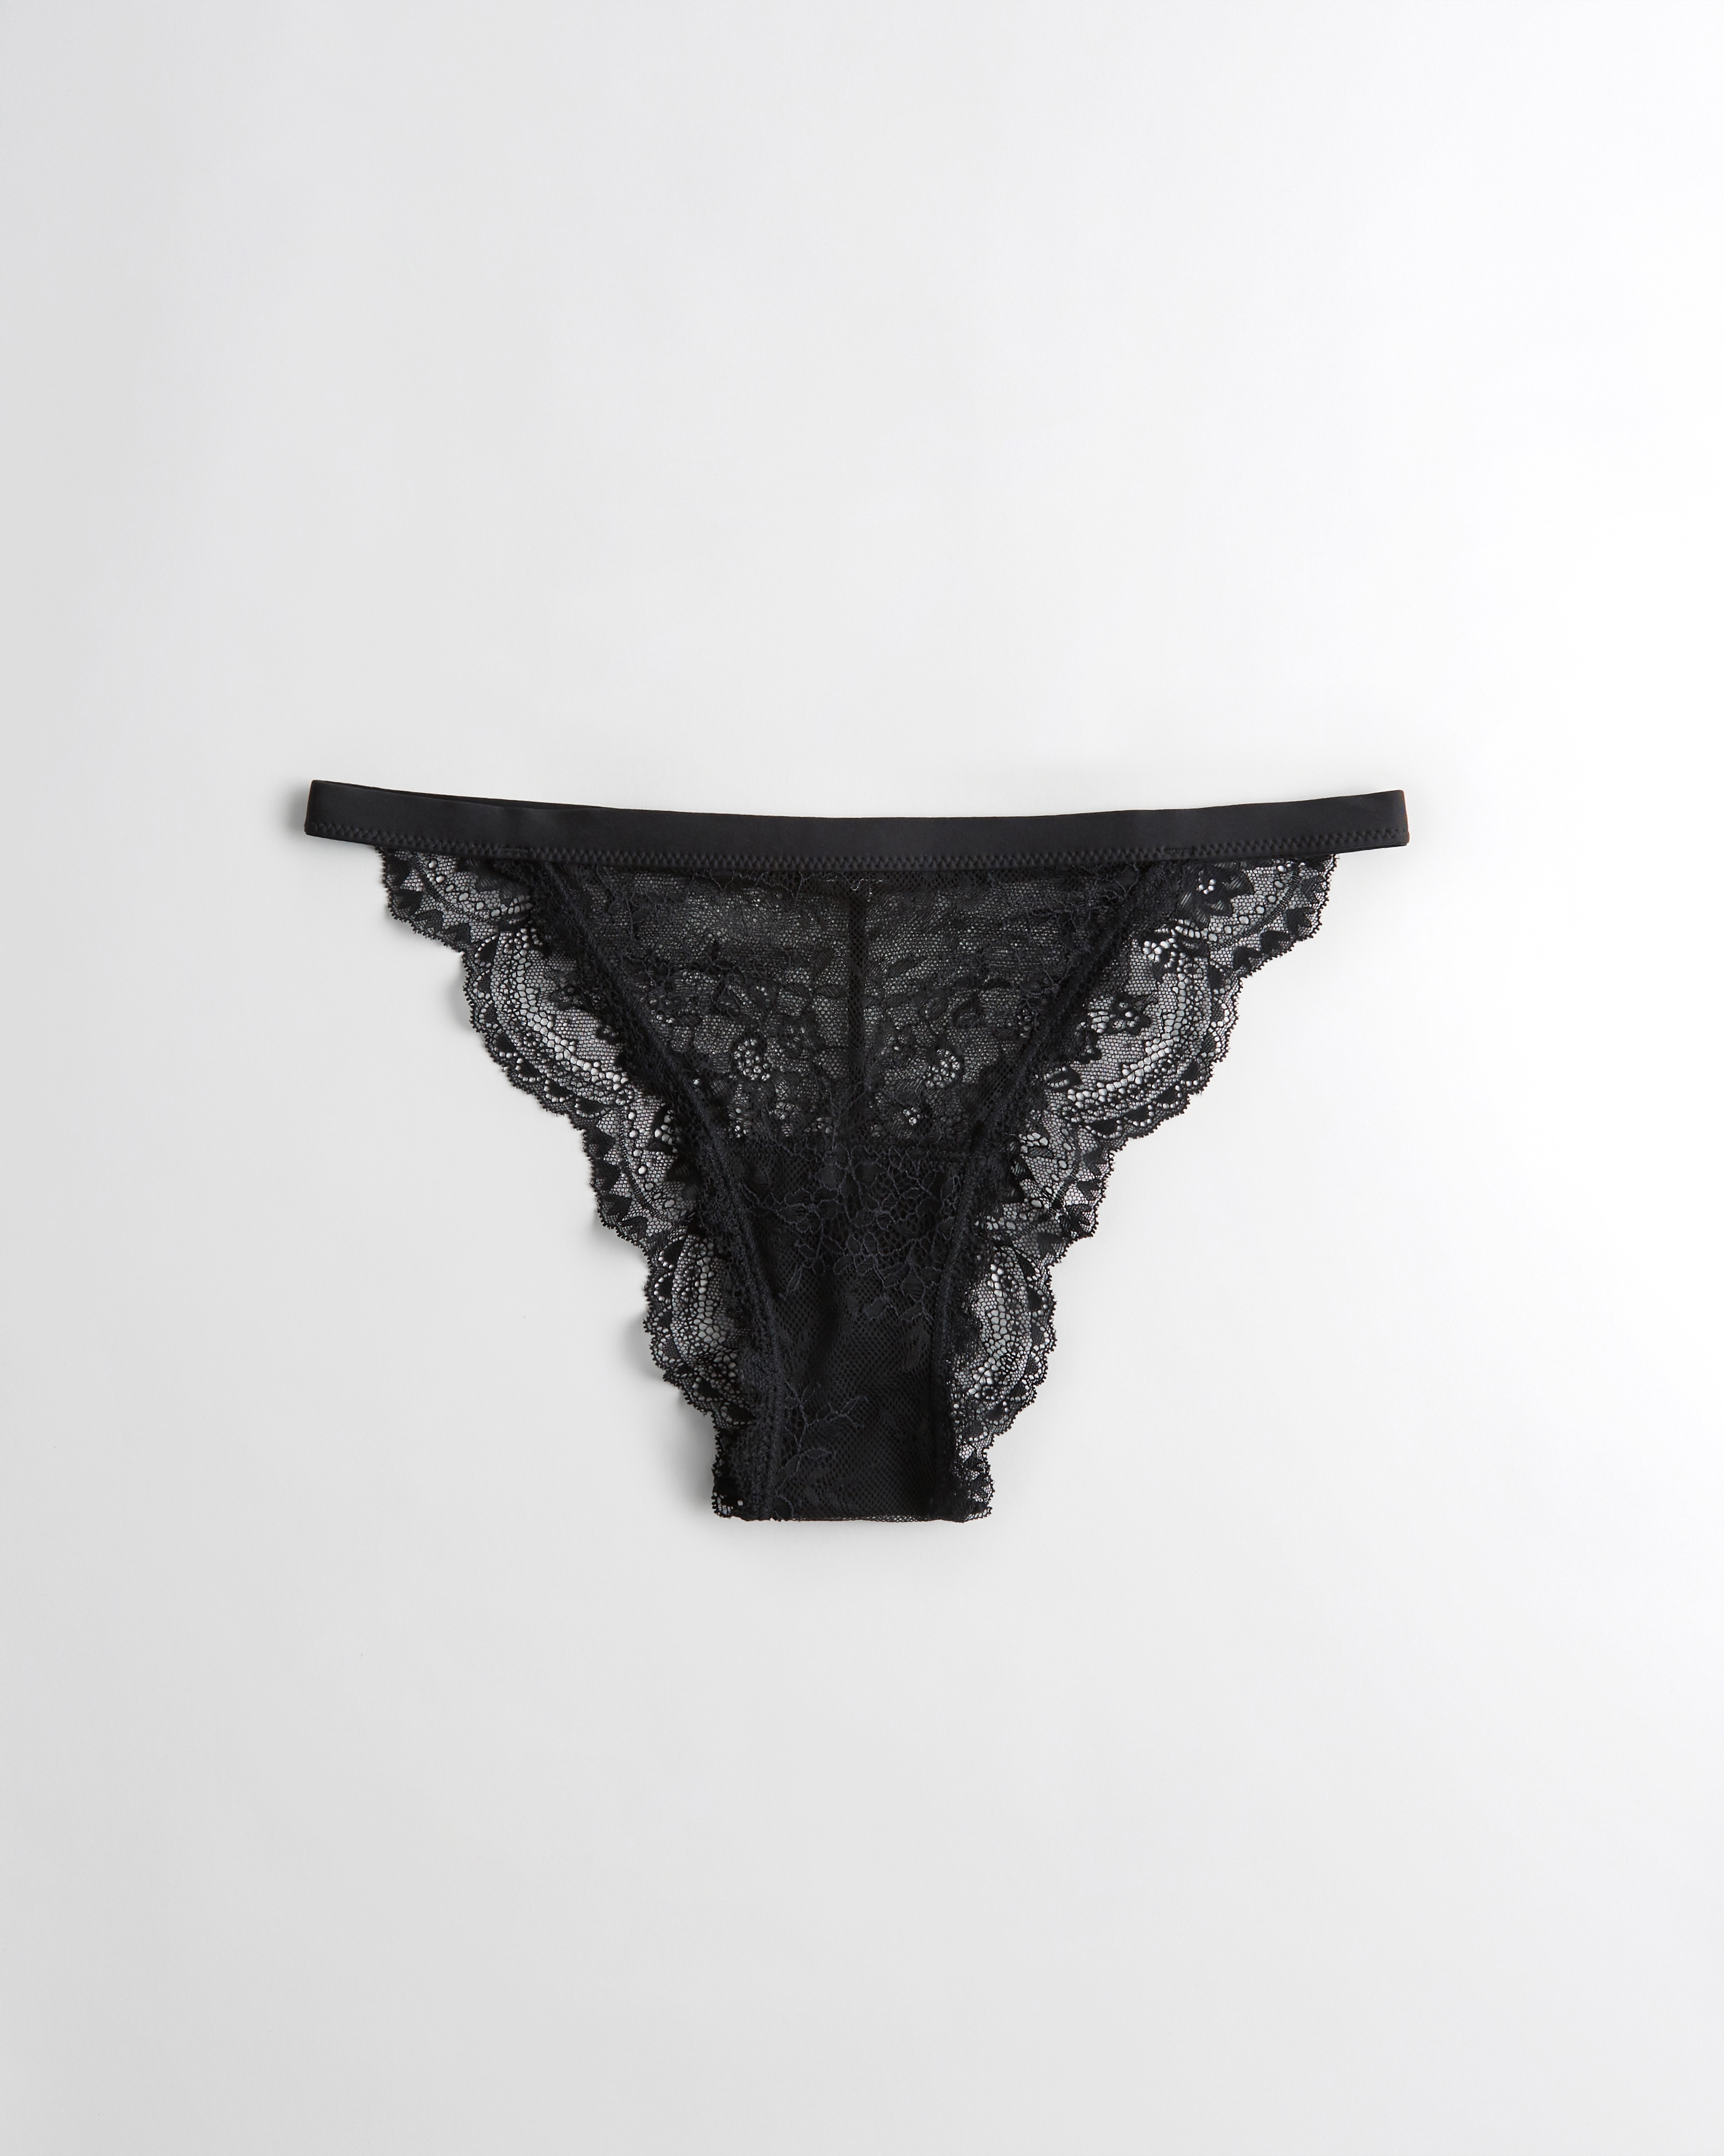 Hollister Gilly Hicks Lace String Cheeky Underwear